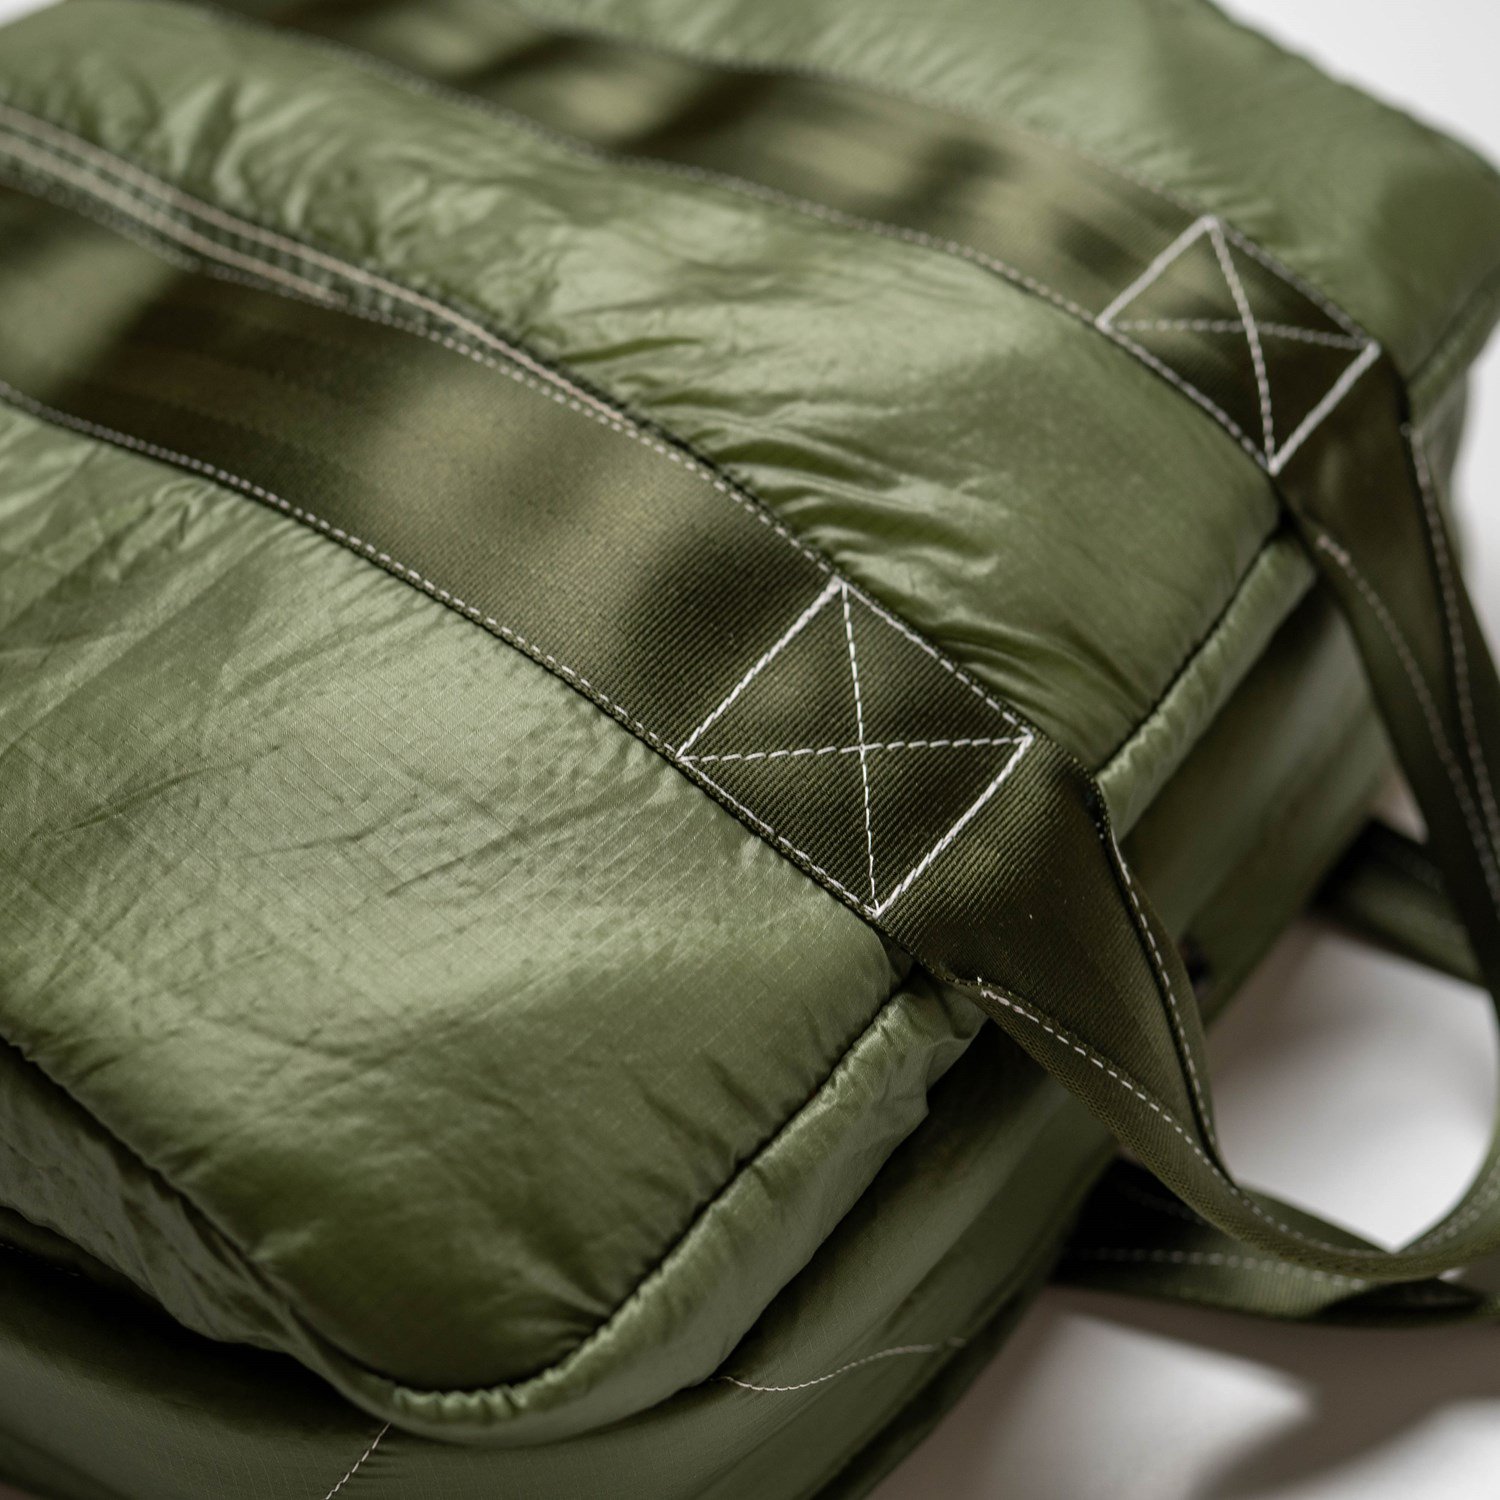 MADE IN OCCUPIED JAPAN PARACHUTE BAG